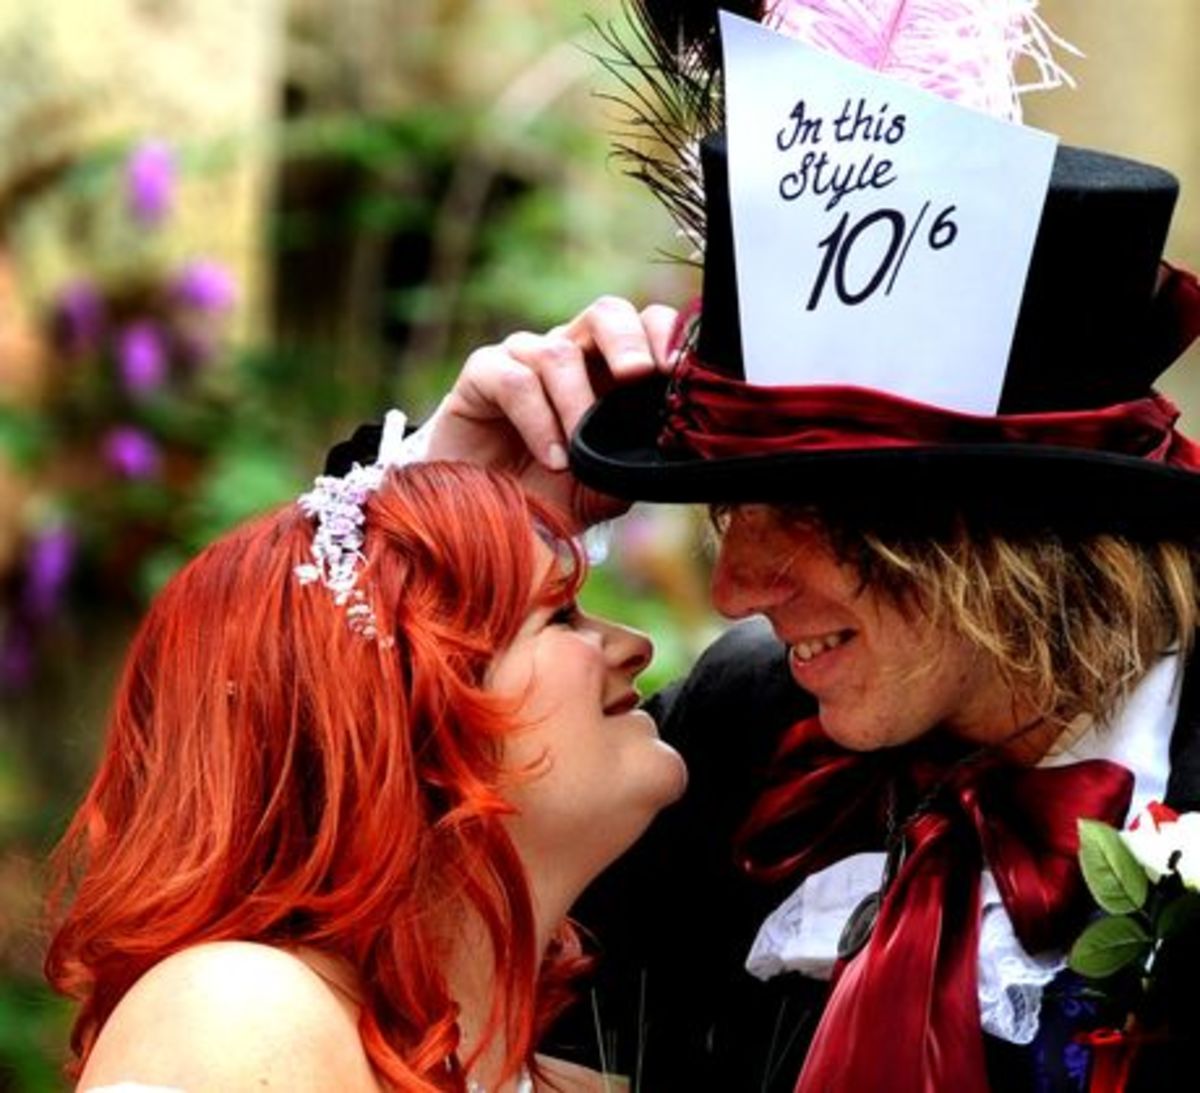 Alice In Wonderland Themed Wedding: A Vintage Storybook Theme For The Offbeat Bride